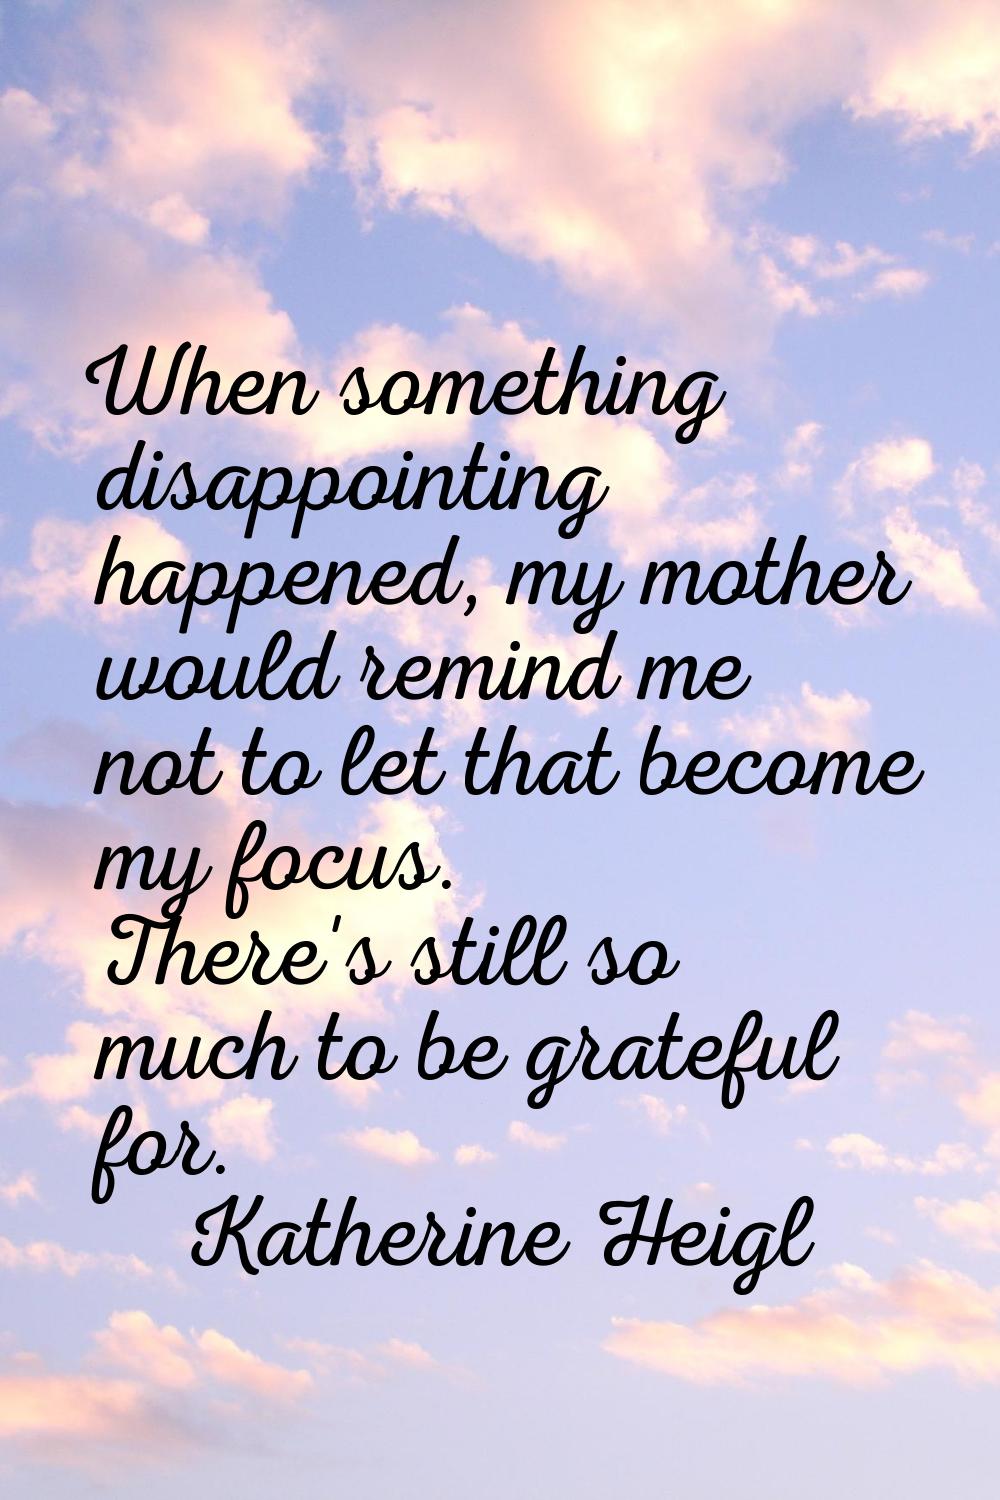 When something disappointing happened, my mother would remind me not to let that become my focus. T